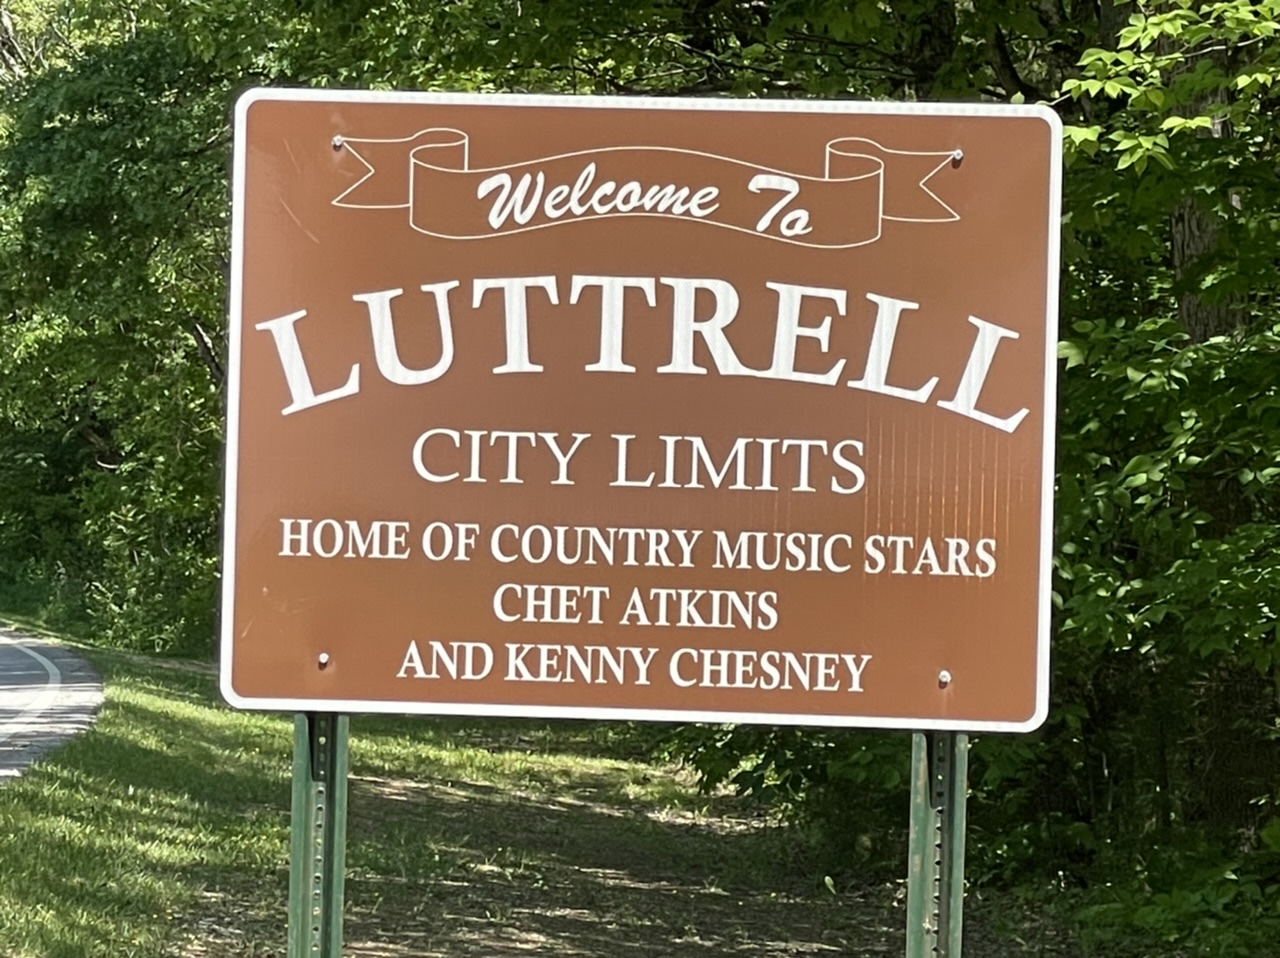 Luttrell city limits sign.  Photo taken by and the property of FourWalls.